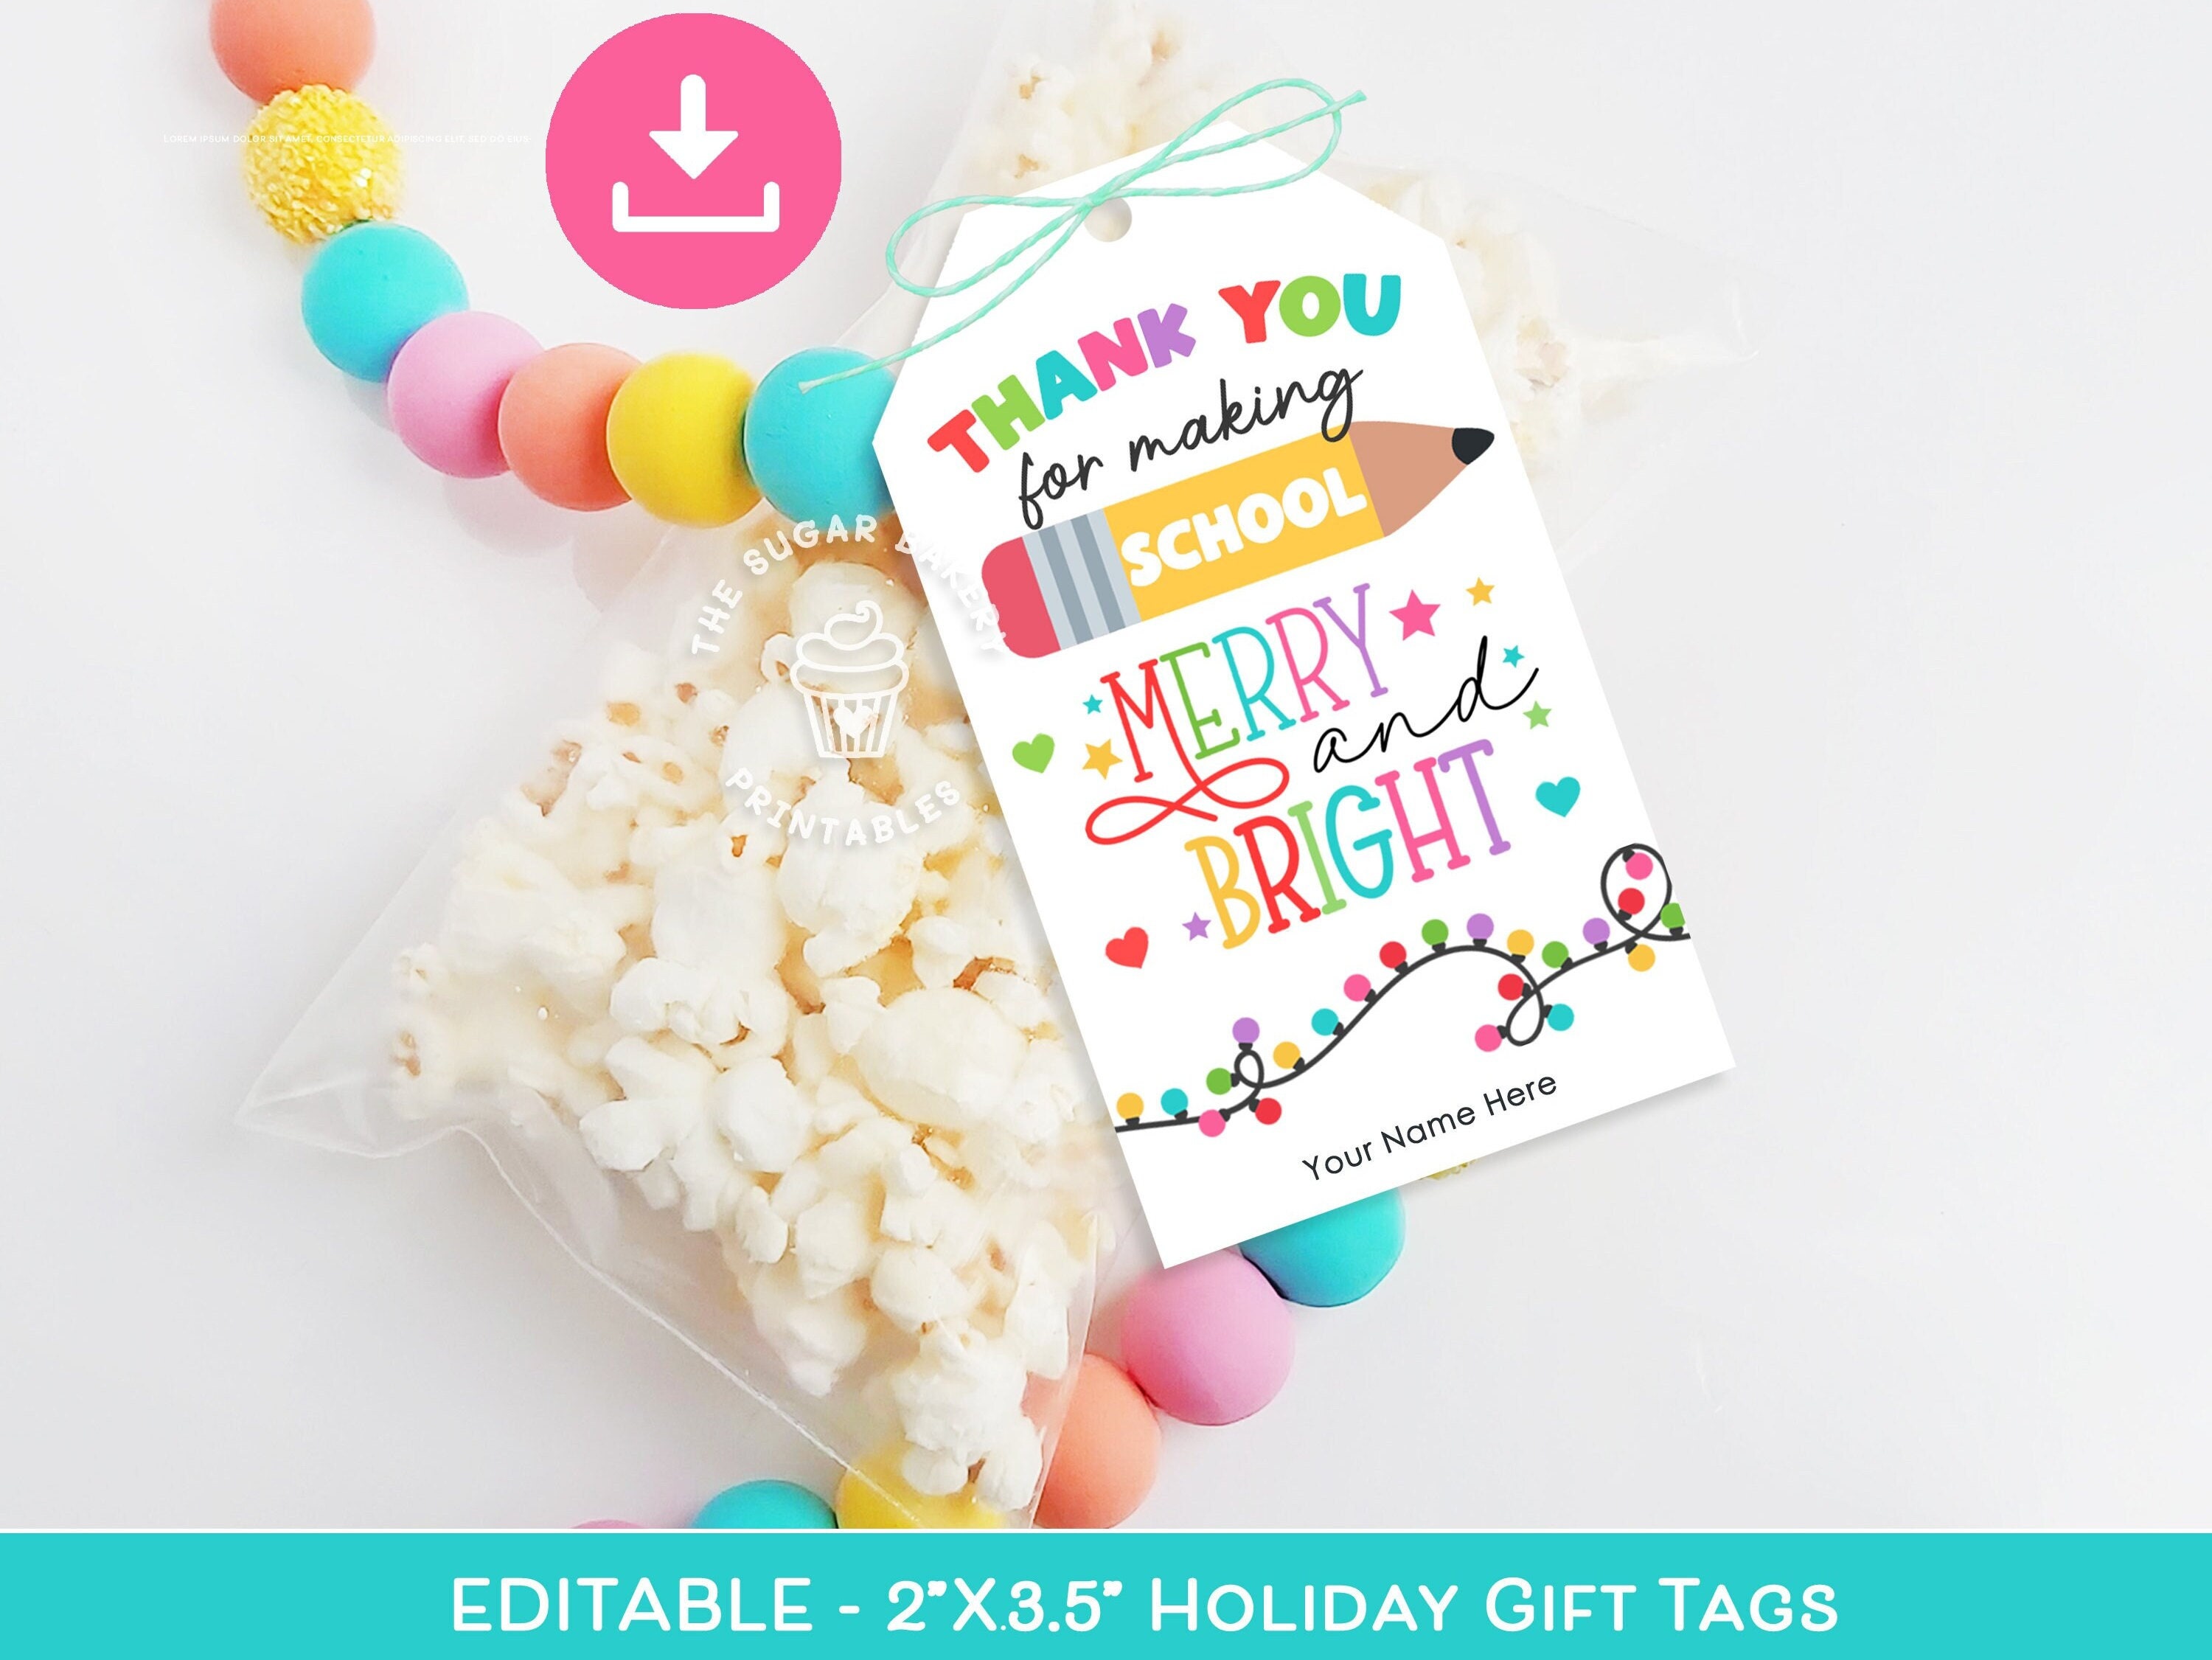 Free Printable Construction Gift Tags for Neighbors - See Vanessa Craft